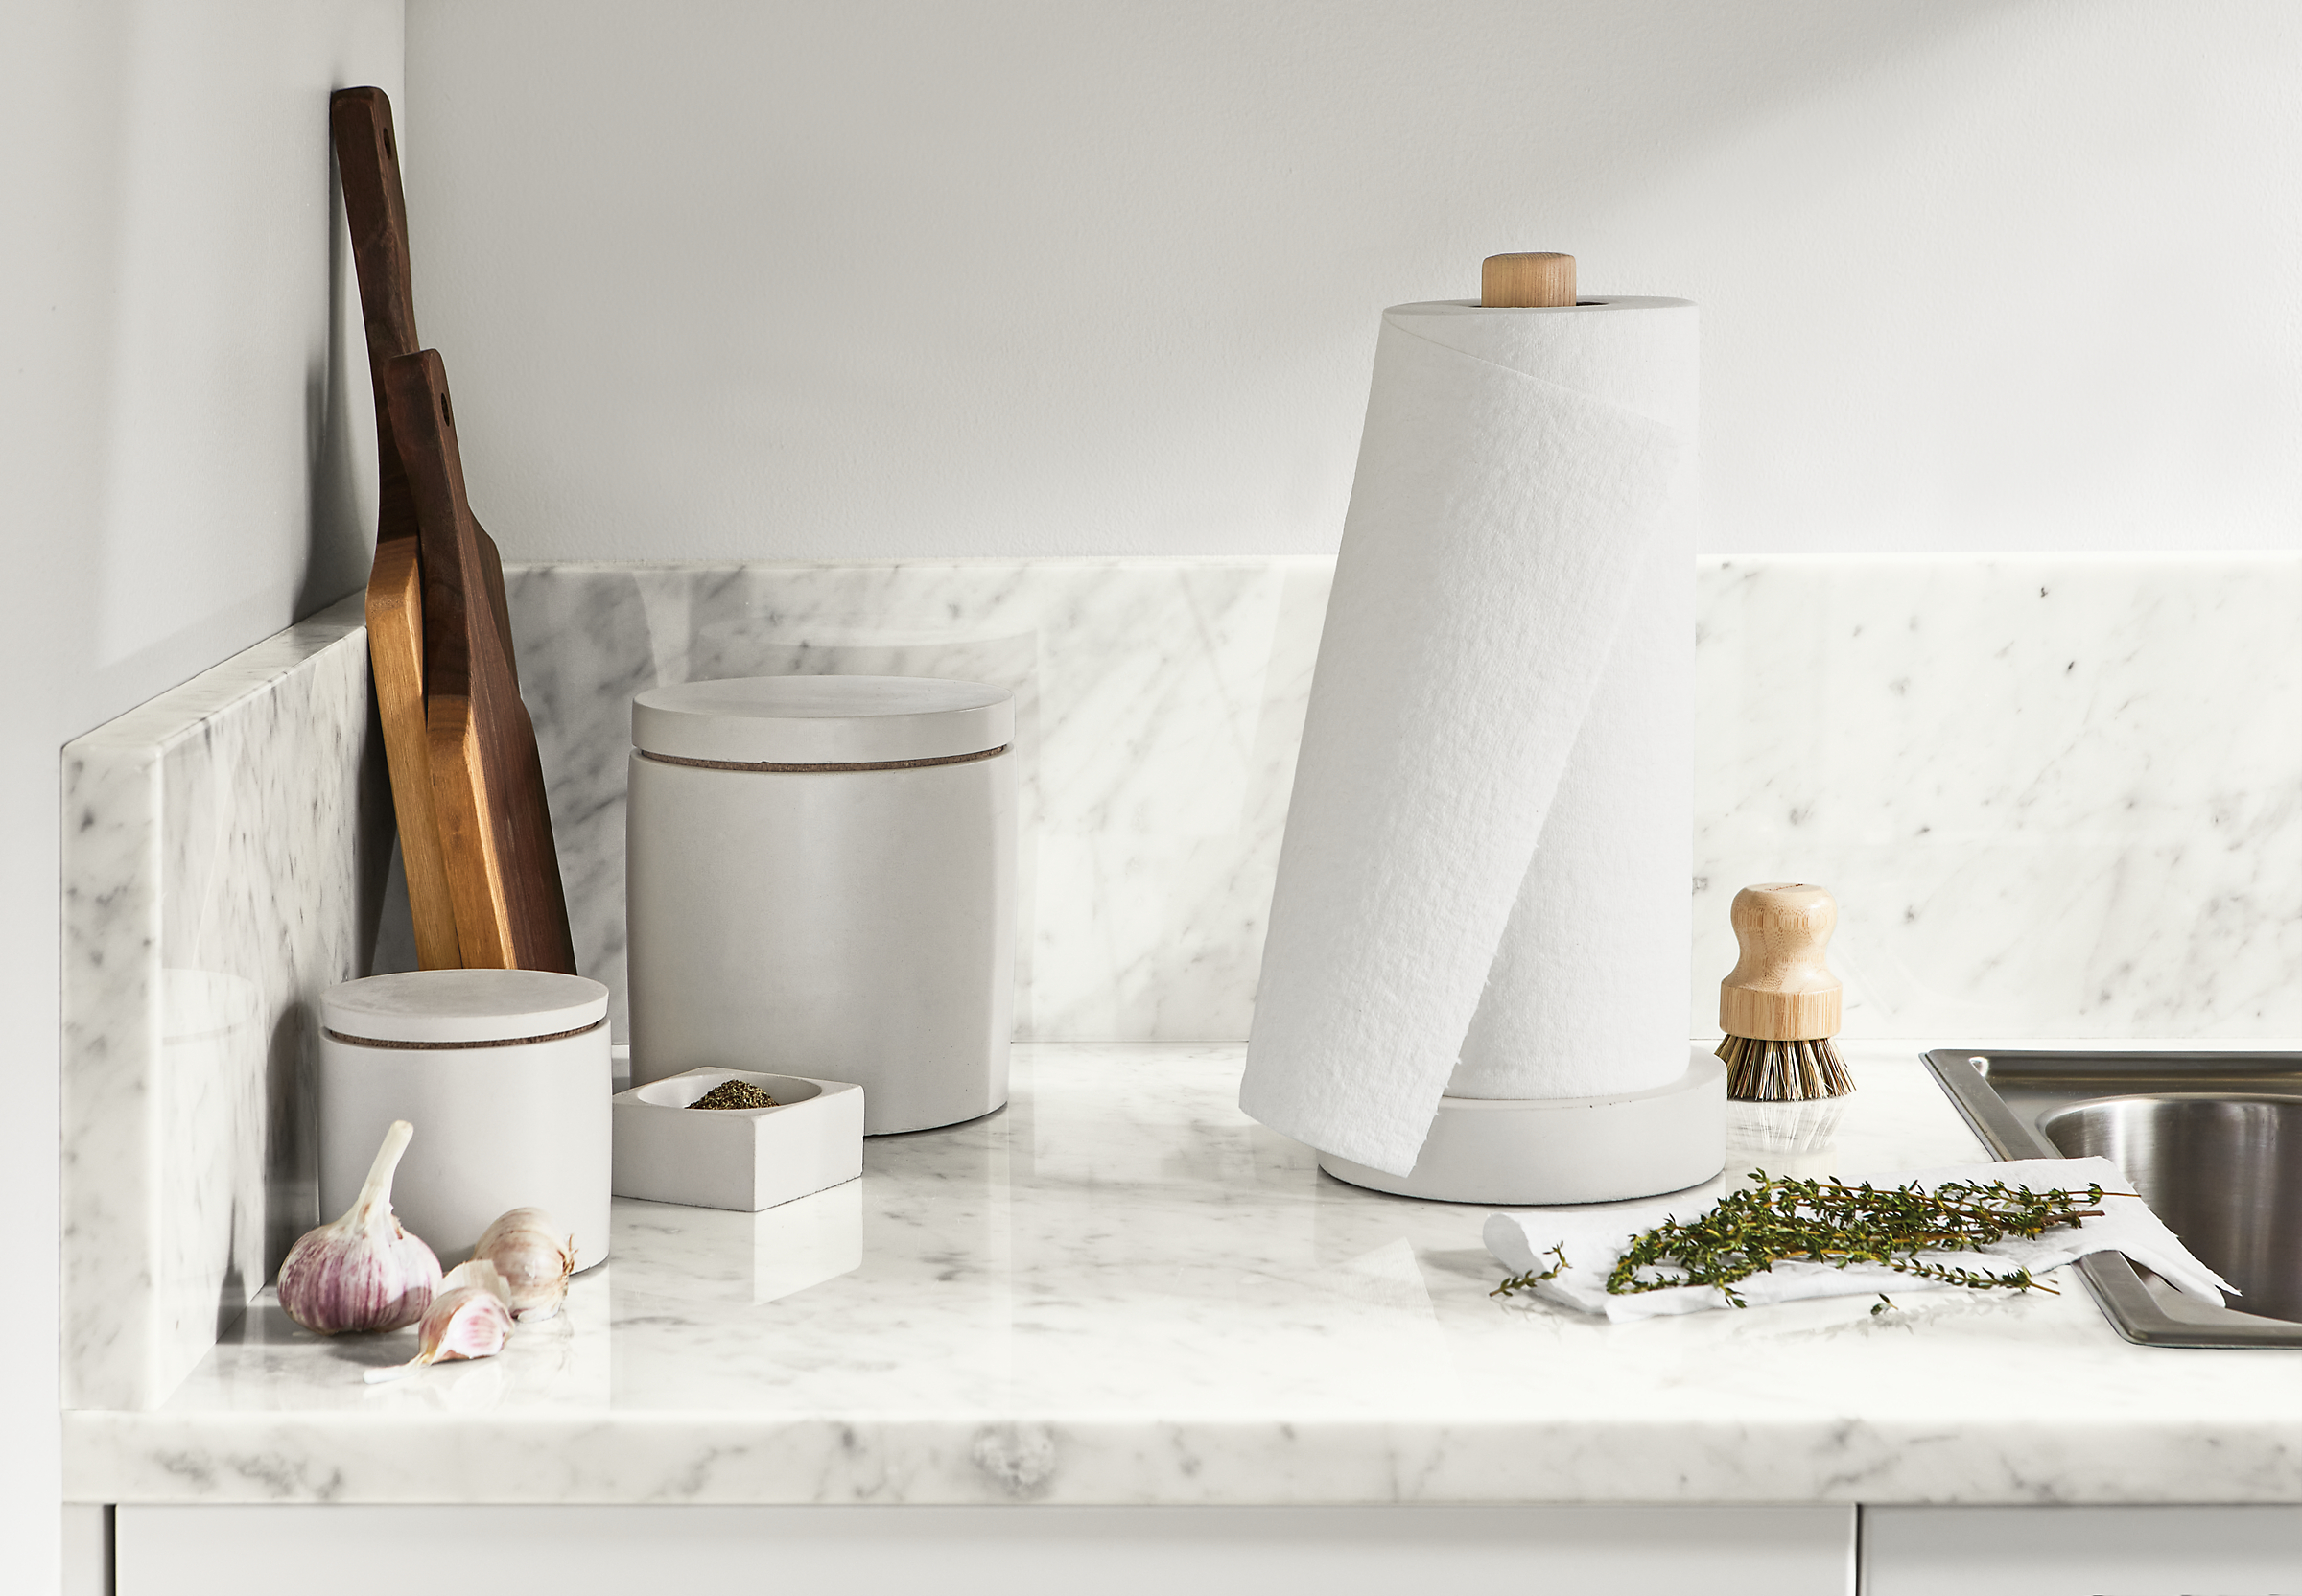 Kitchen setting with saco paper towel holder and canisters in white.